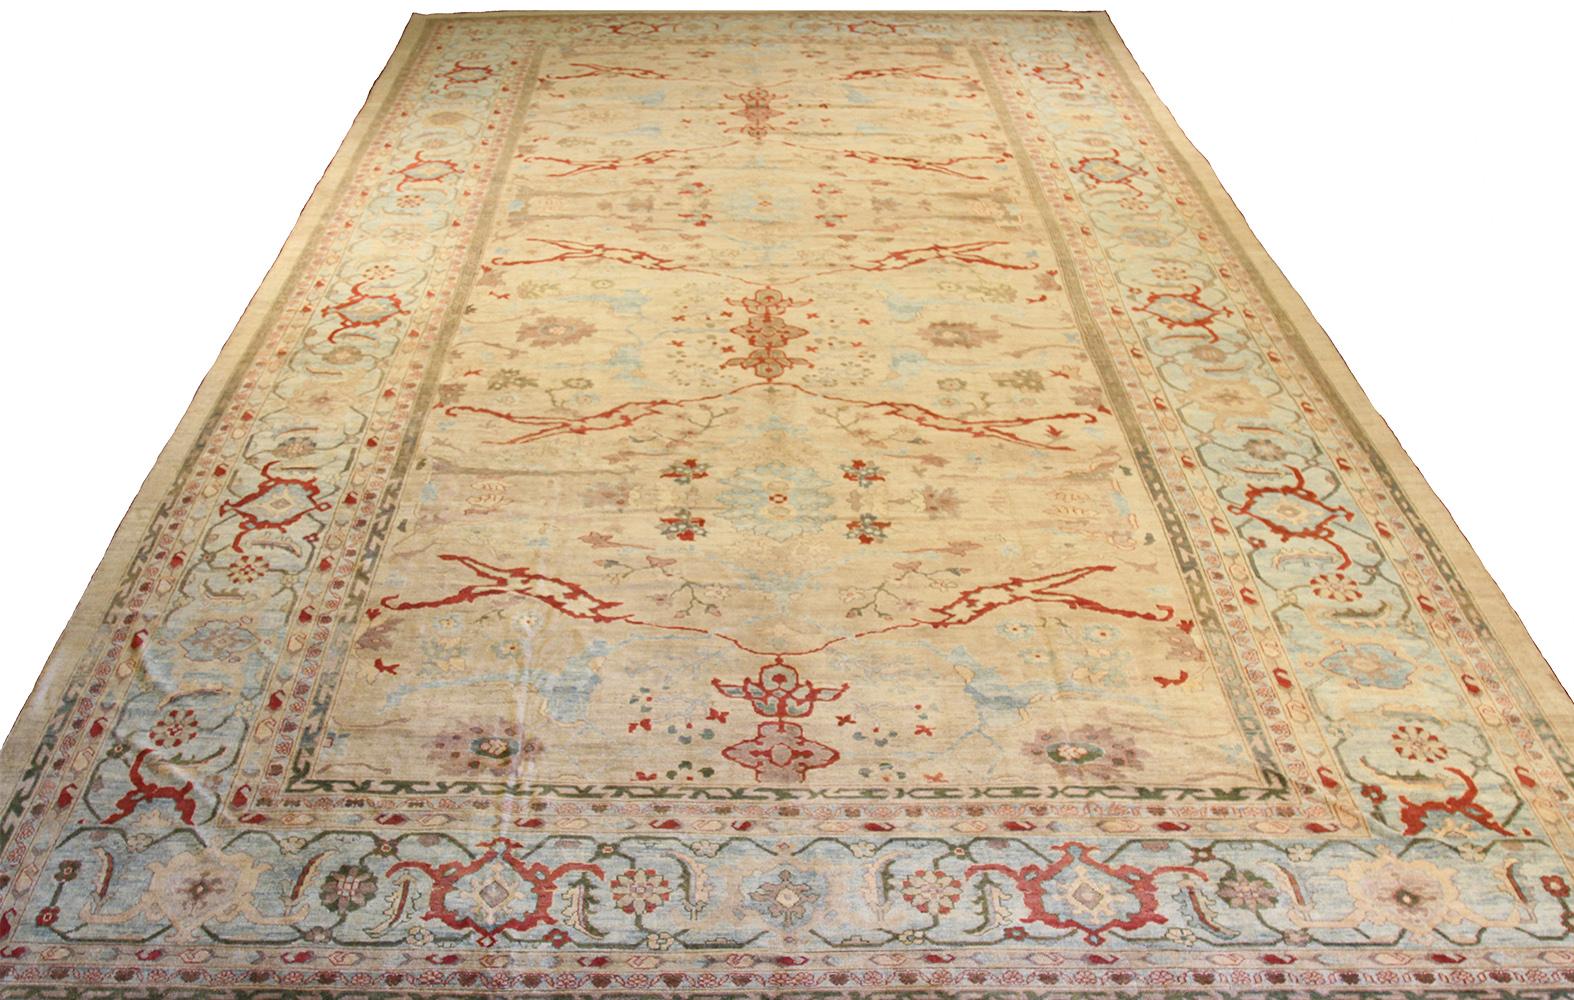 Oversize handmade Turkish area rug from high-quality sheep’s wool and colored with eco-friendly vegetable dyes that are proven safe for humans and pets alike. It’s a Classic Sultanabad design showcasing a regal ivory field with prominent Herati